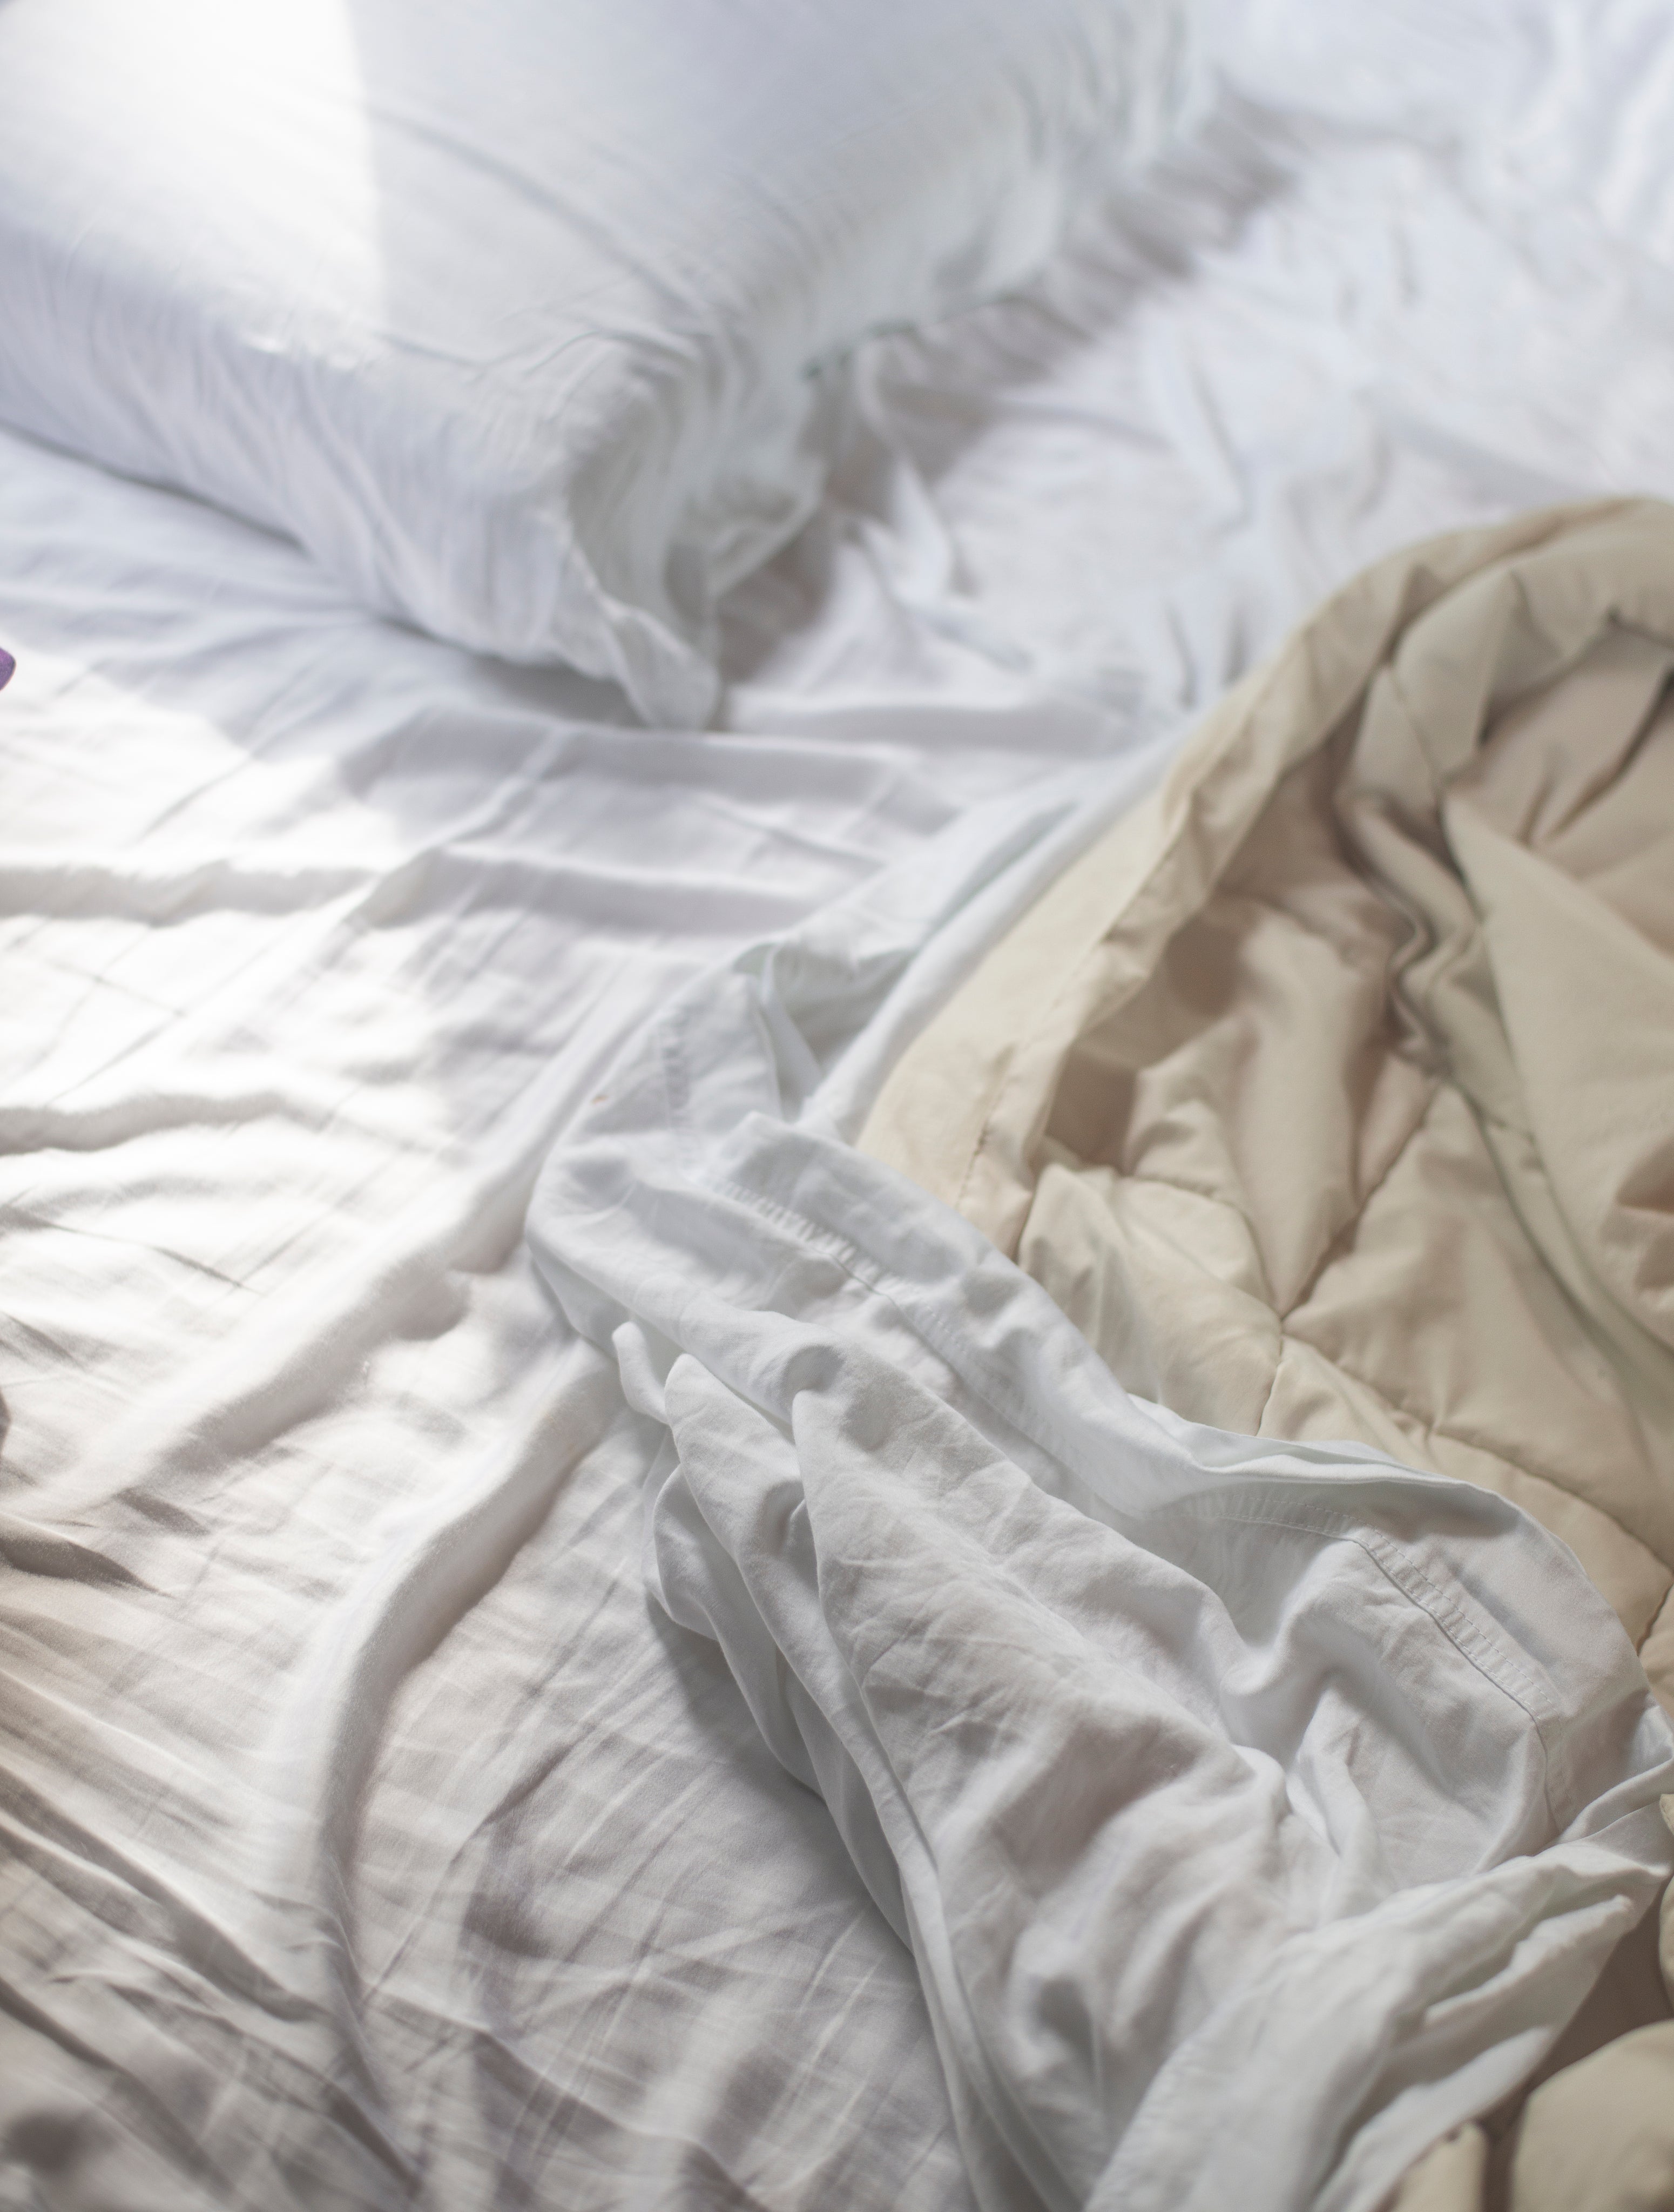 white-pillows-and-sheets-on-an-unmade-bed.jpg